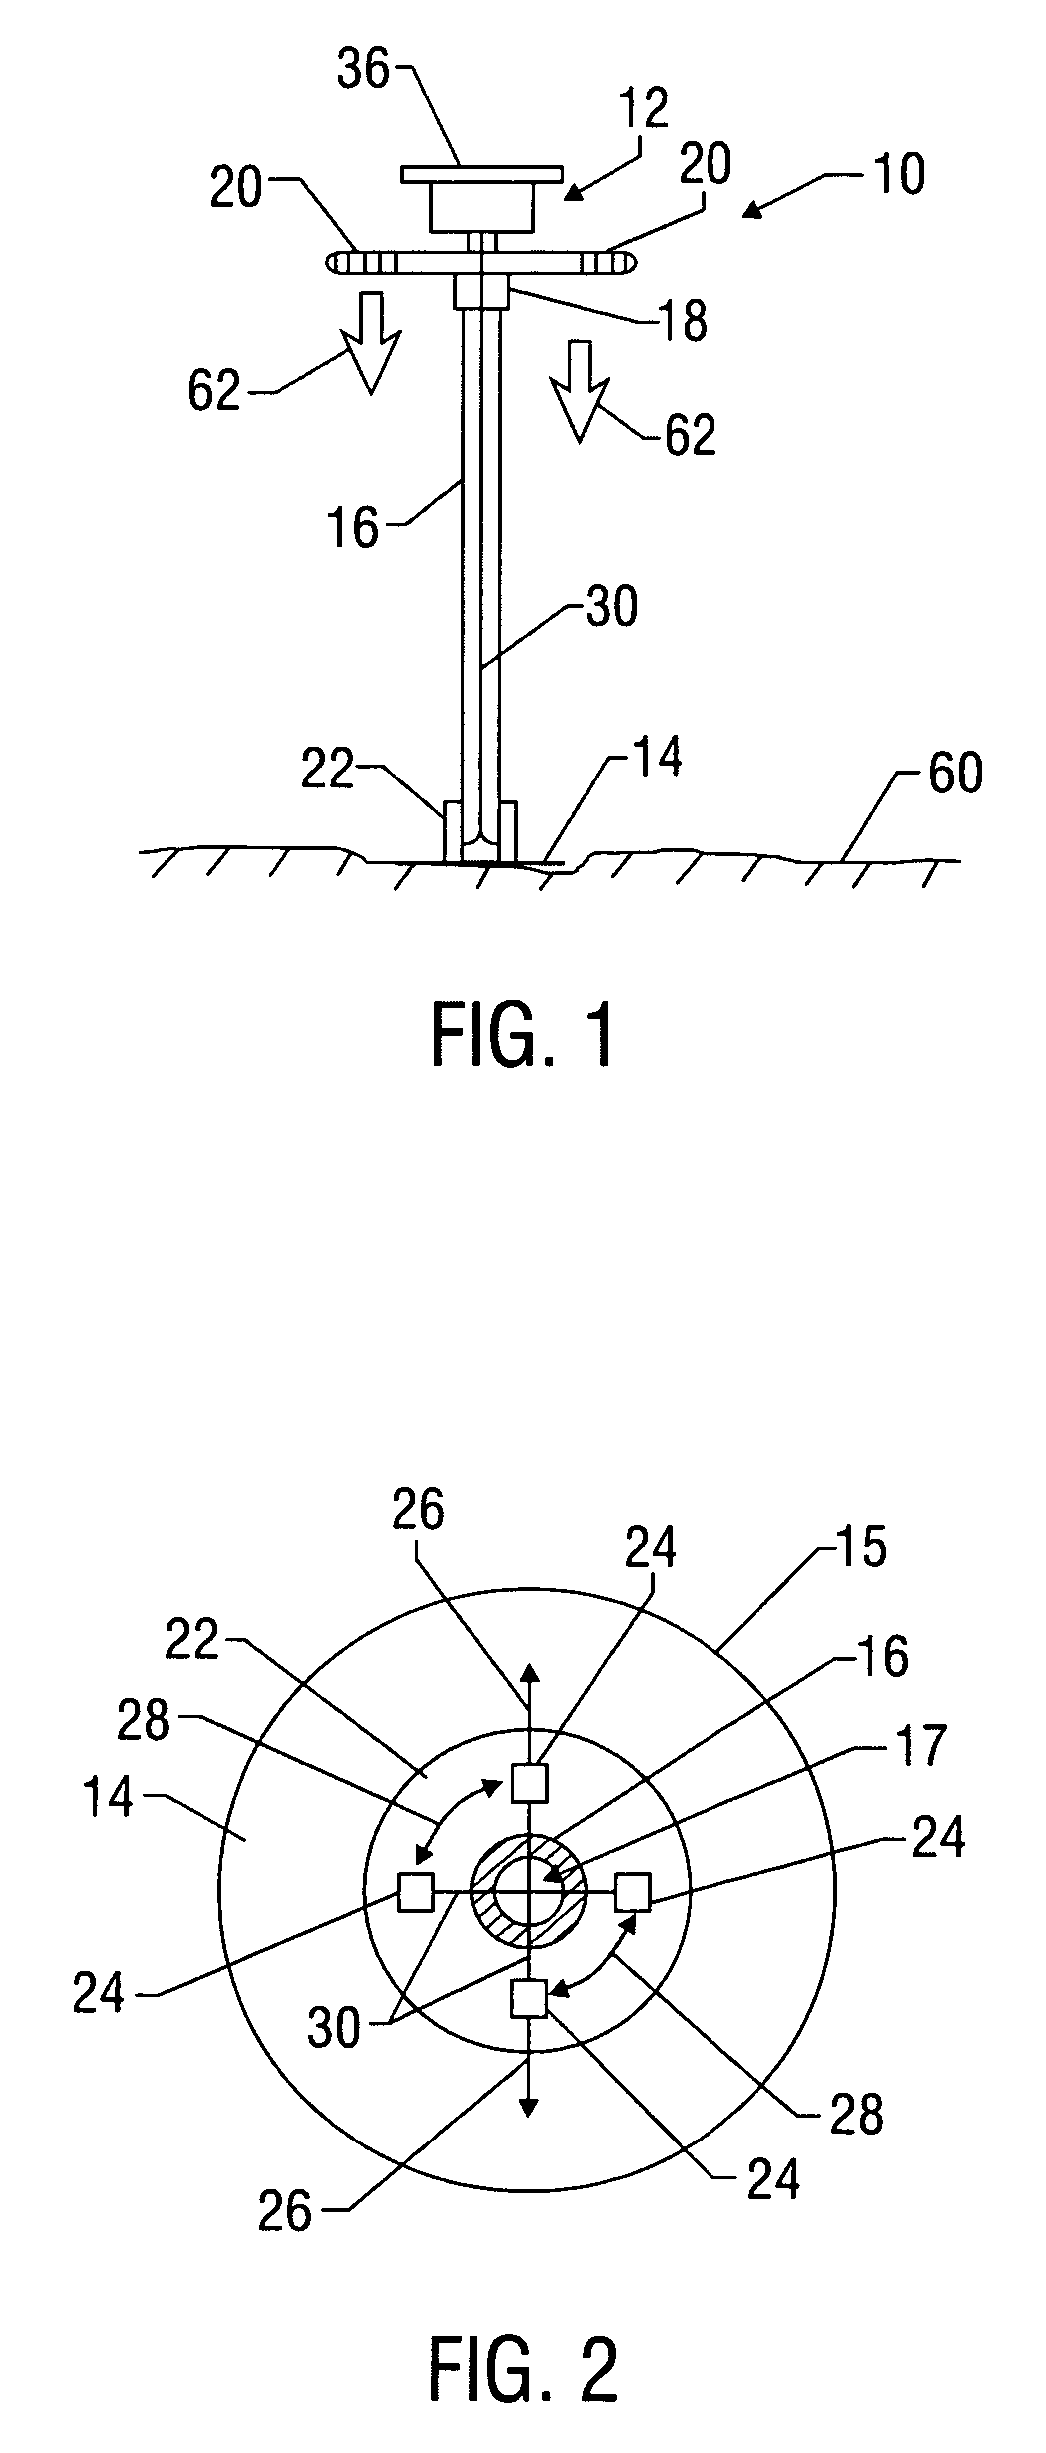 System and method for testing the compaction of soil